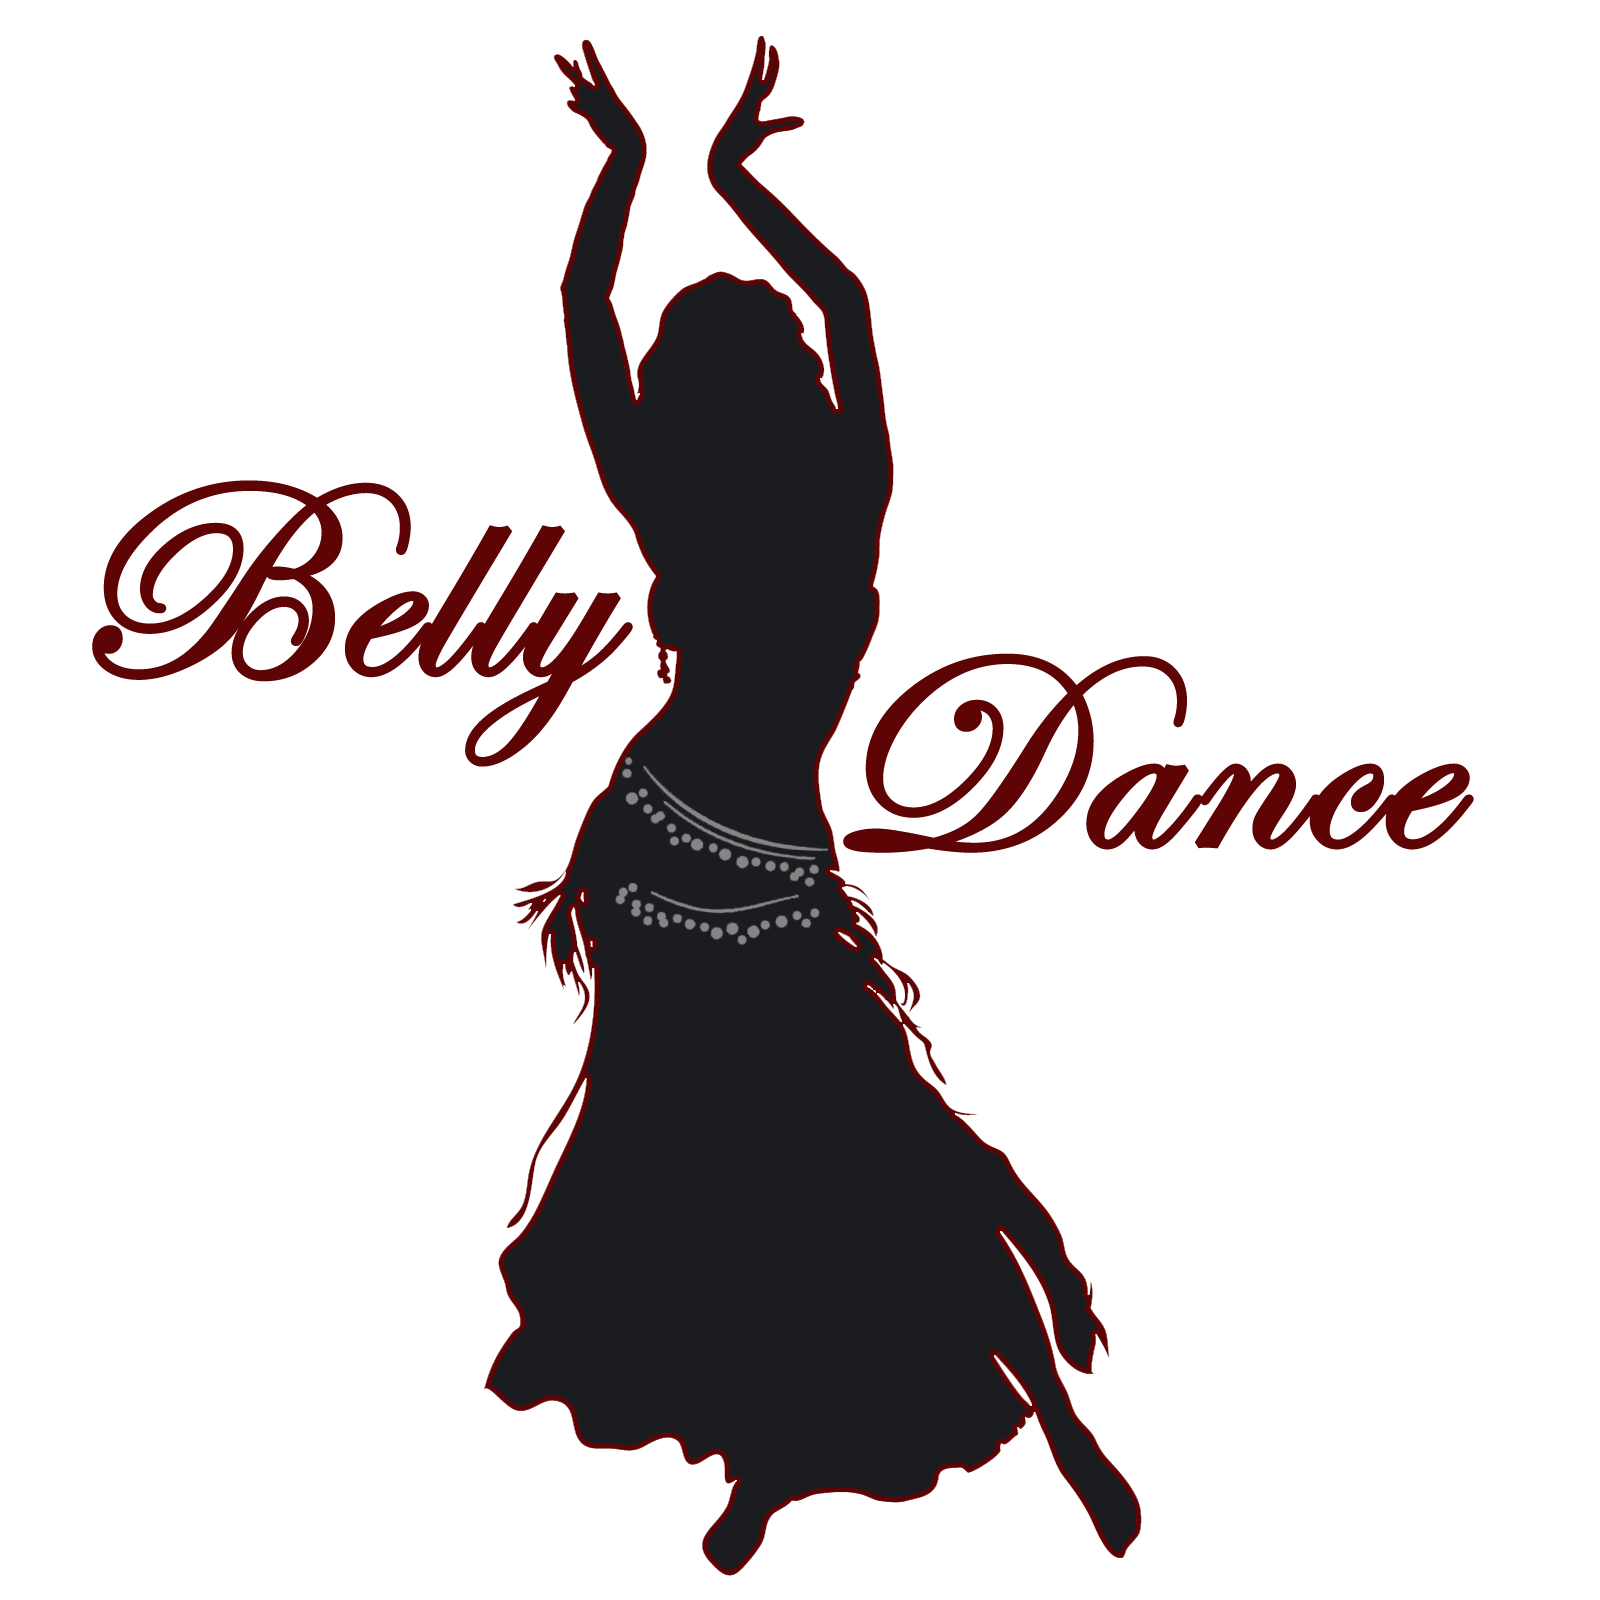 Belly dance Silhouette.